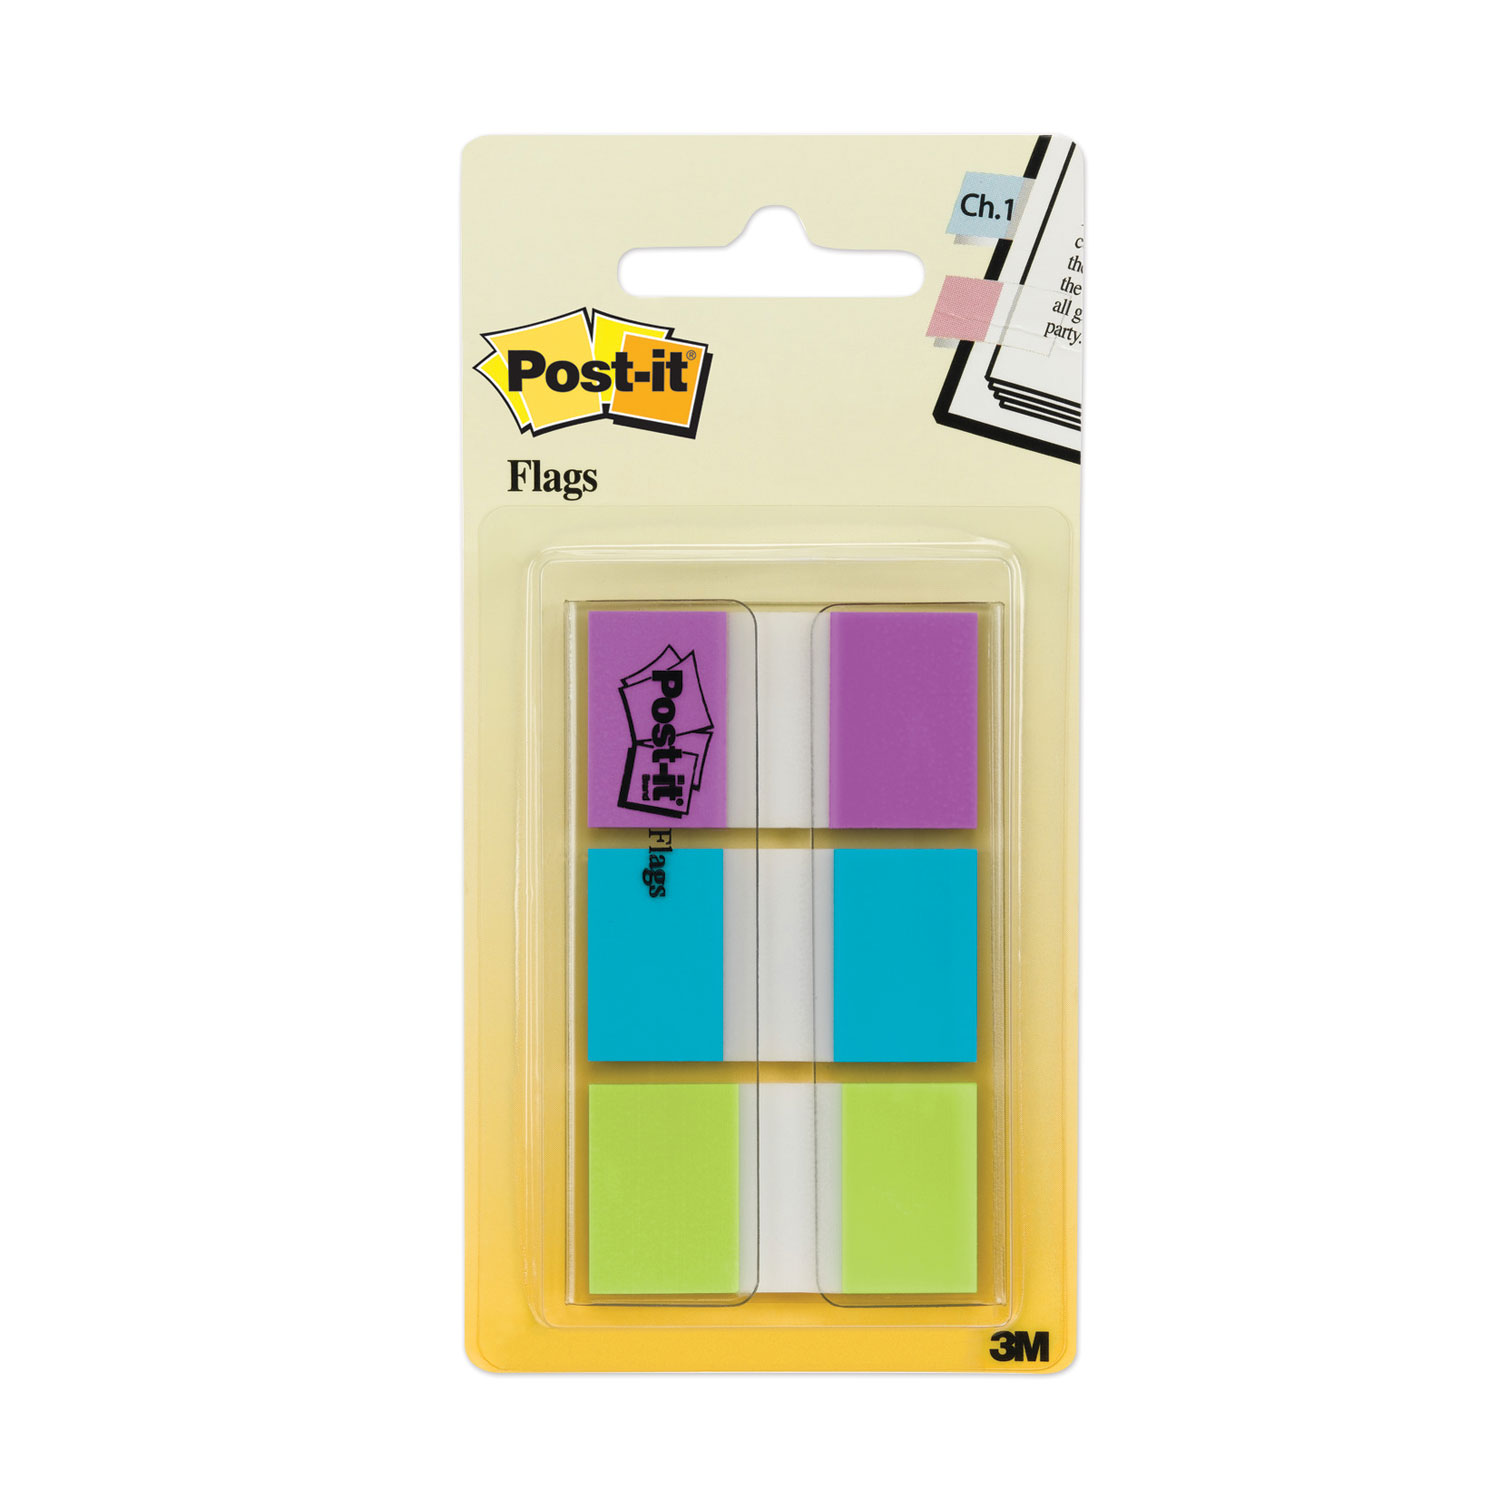  Post-it Flags 680-PBG 0.94 Wide Flags with Dispenser, Bright Blue, Bright Green, Purple, 60 Flags (MMM70071493244) 